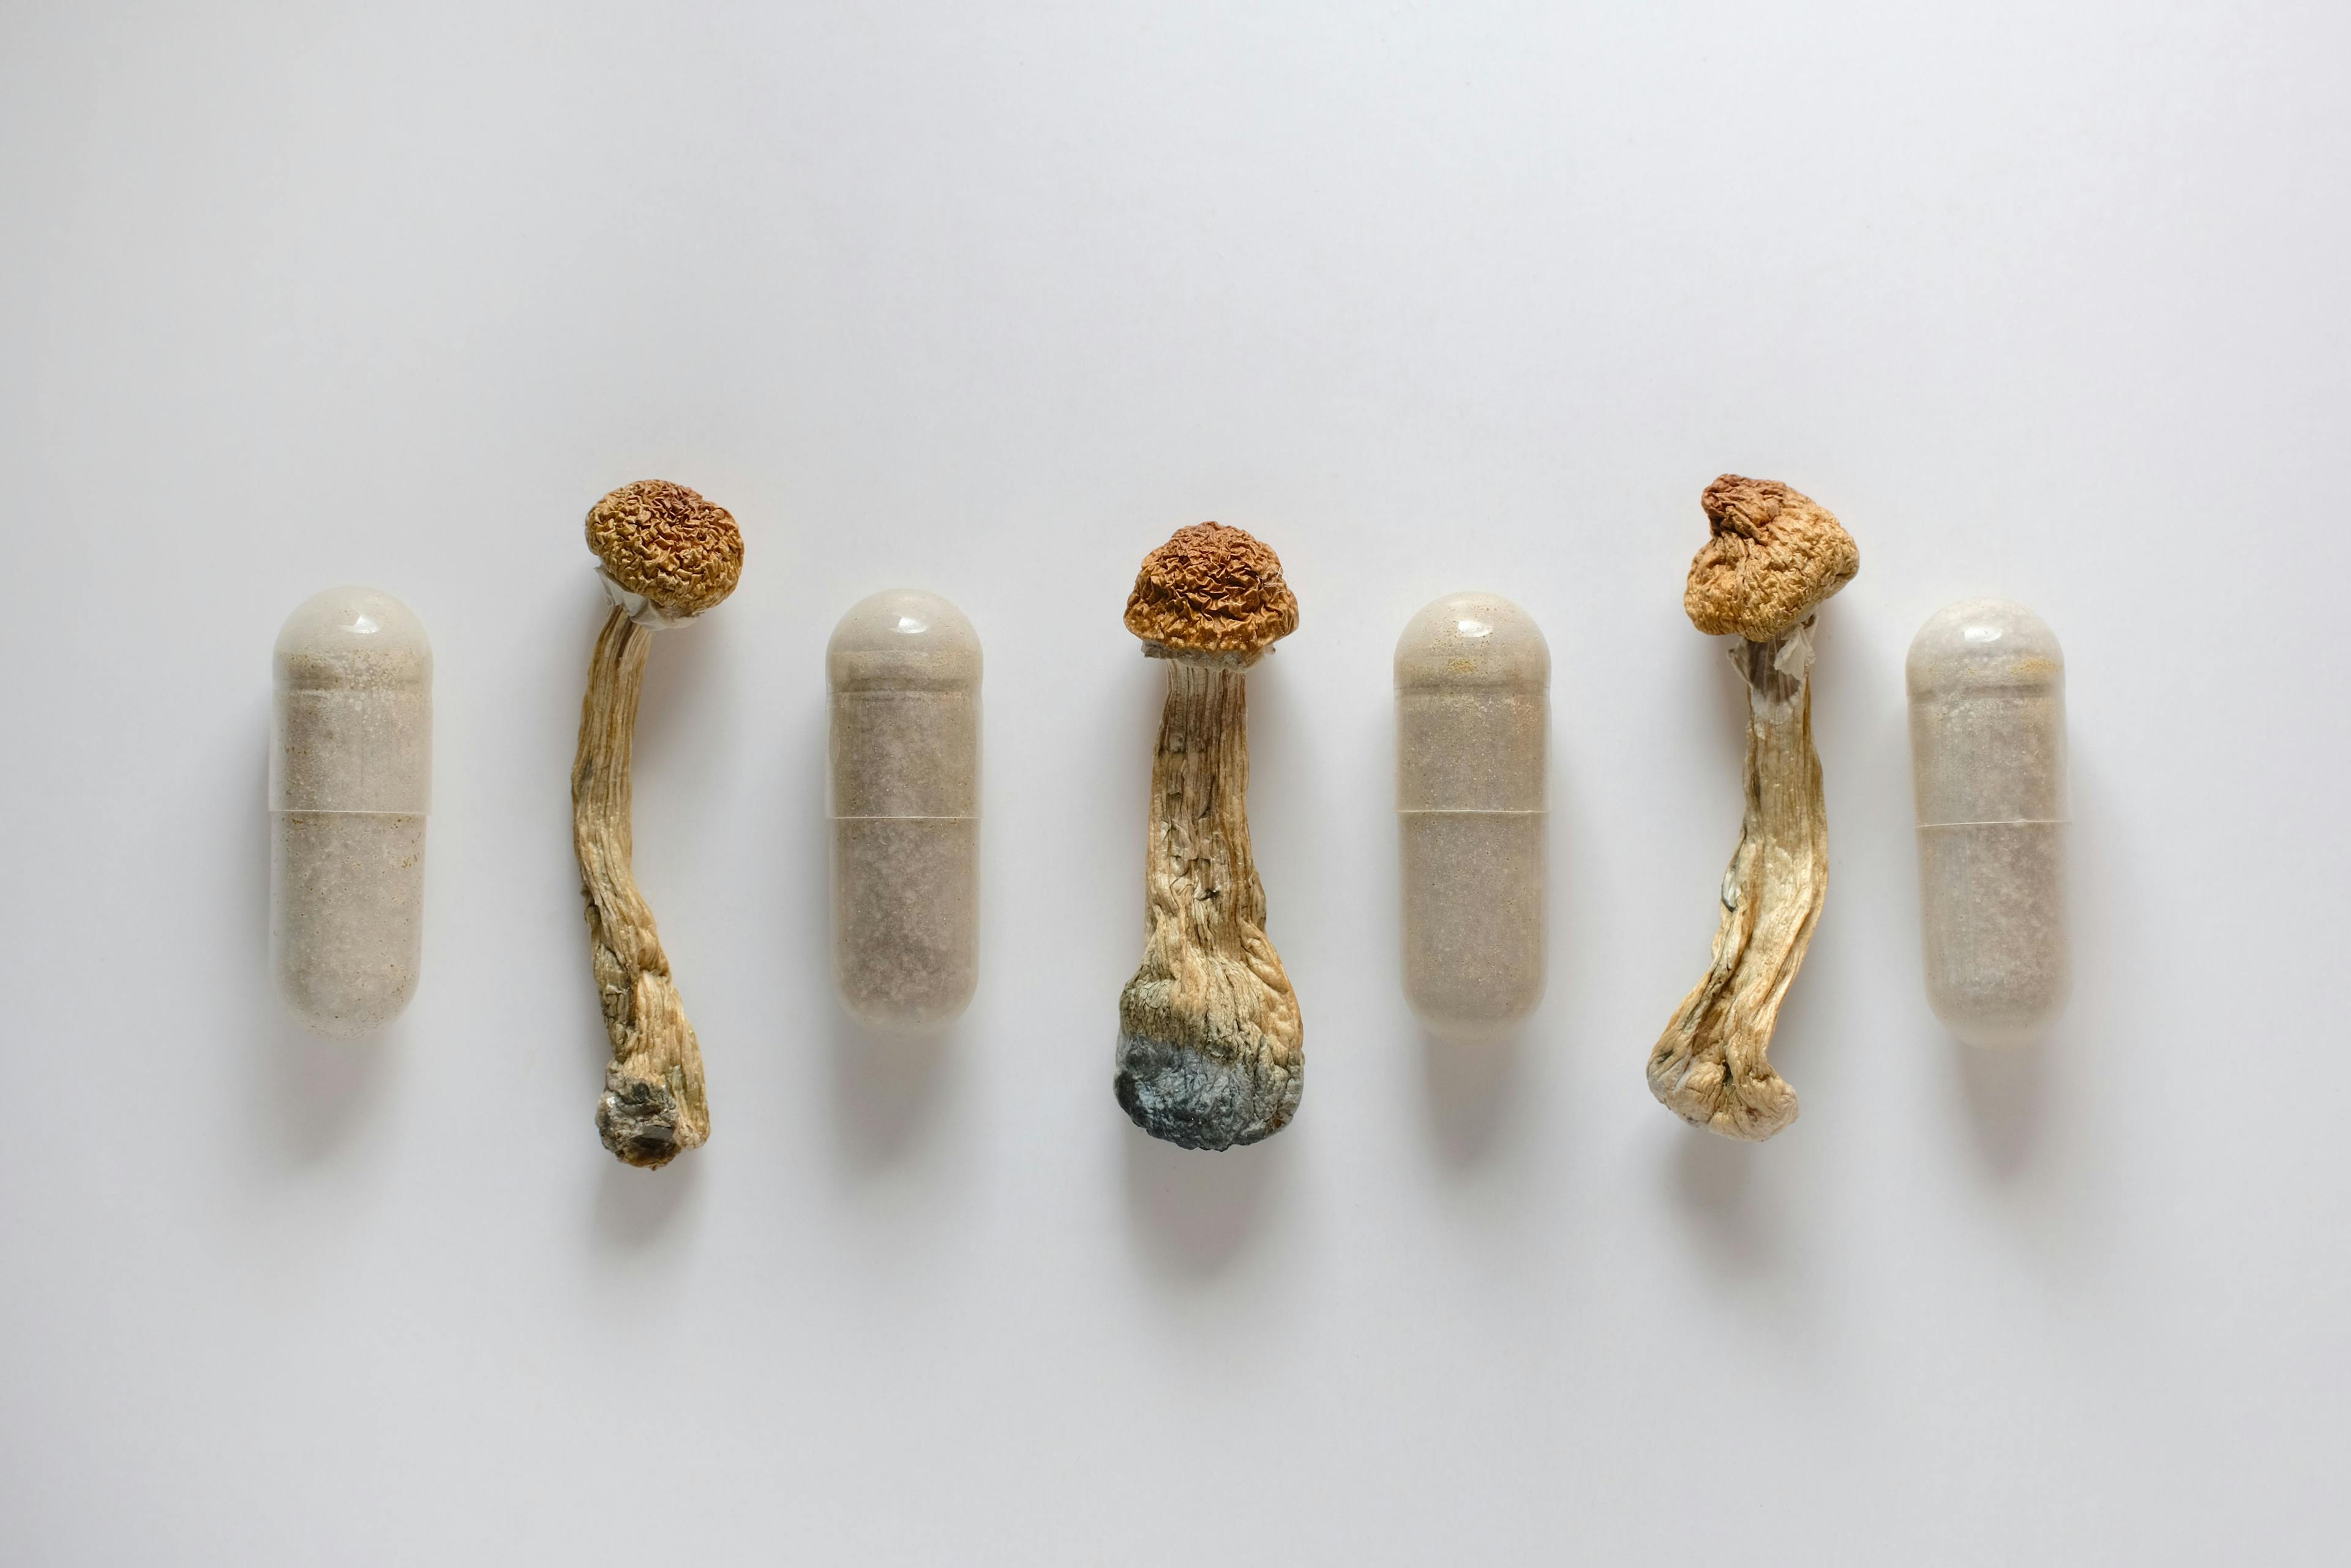 Psilocybin Side Effects Found to be Tolerable, Resolve Within 2 Days